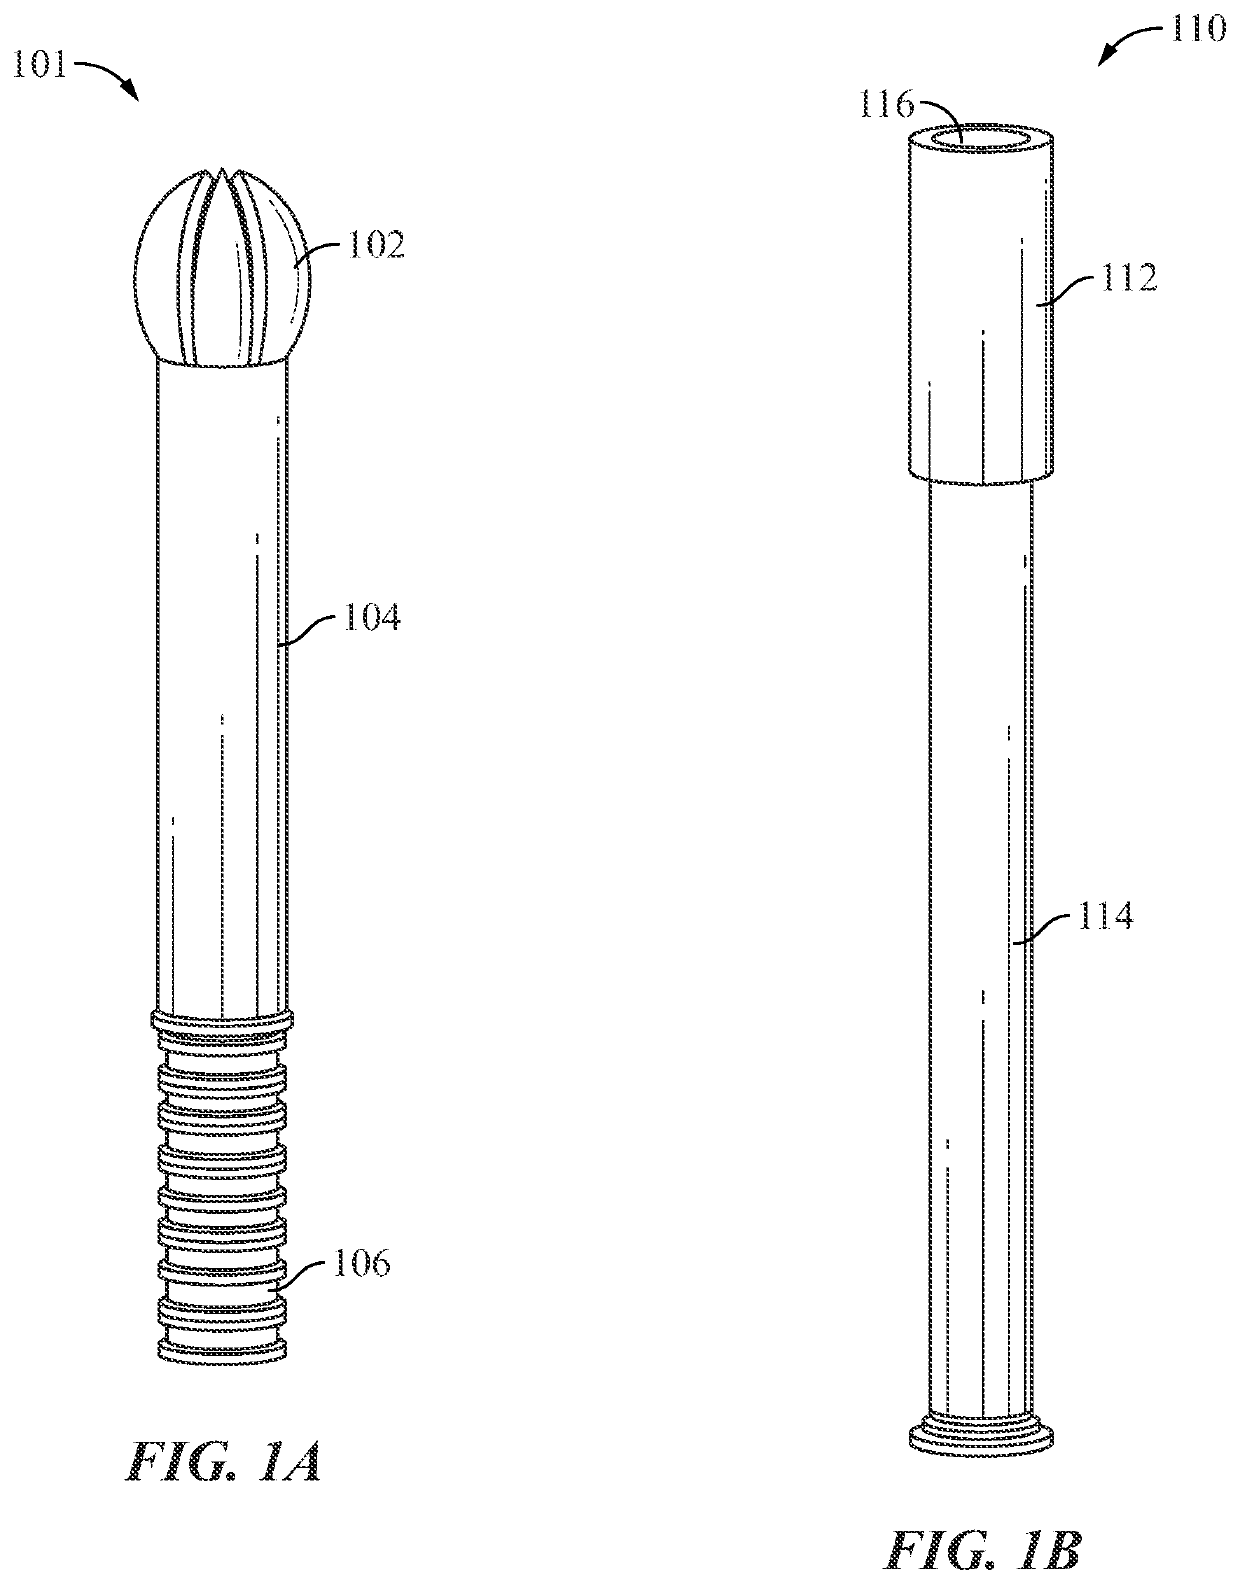 Round tip vaginal insert system and method of using the same